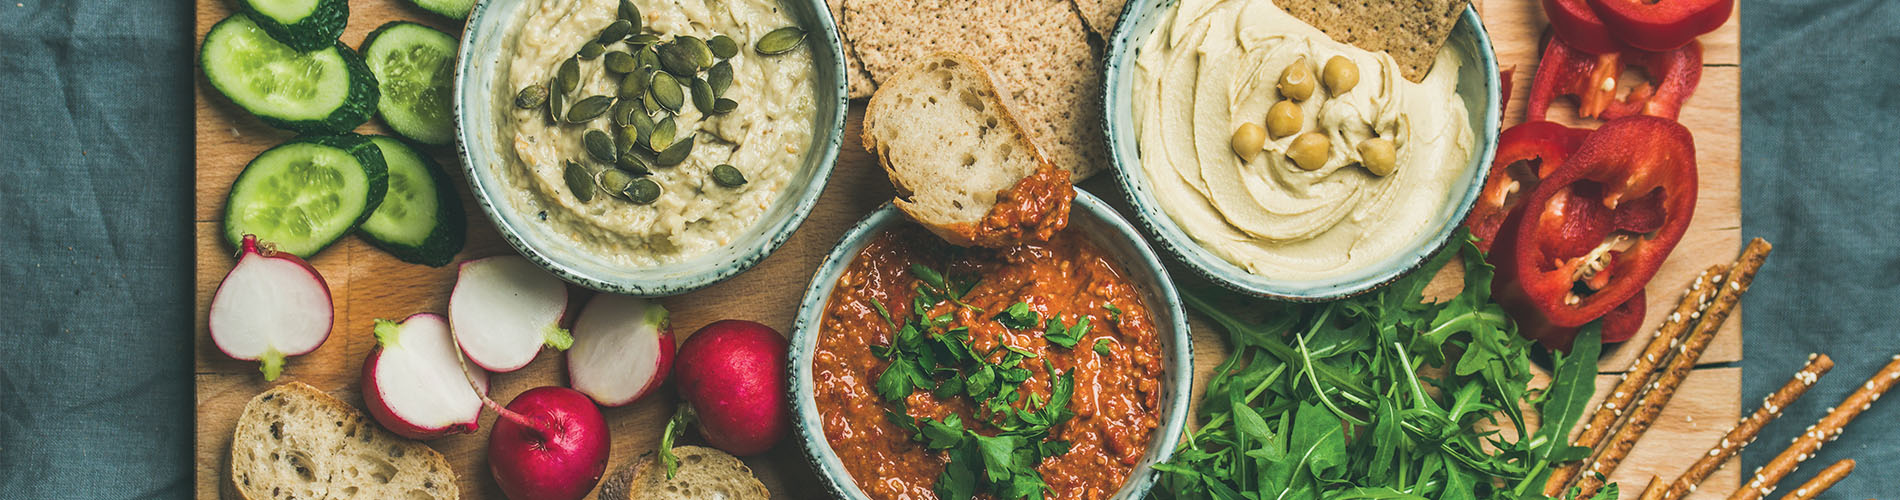 Spread of exotic dips with vegetables and bread